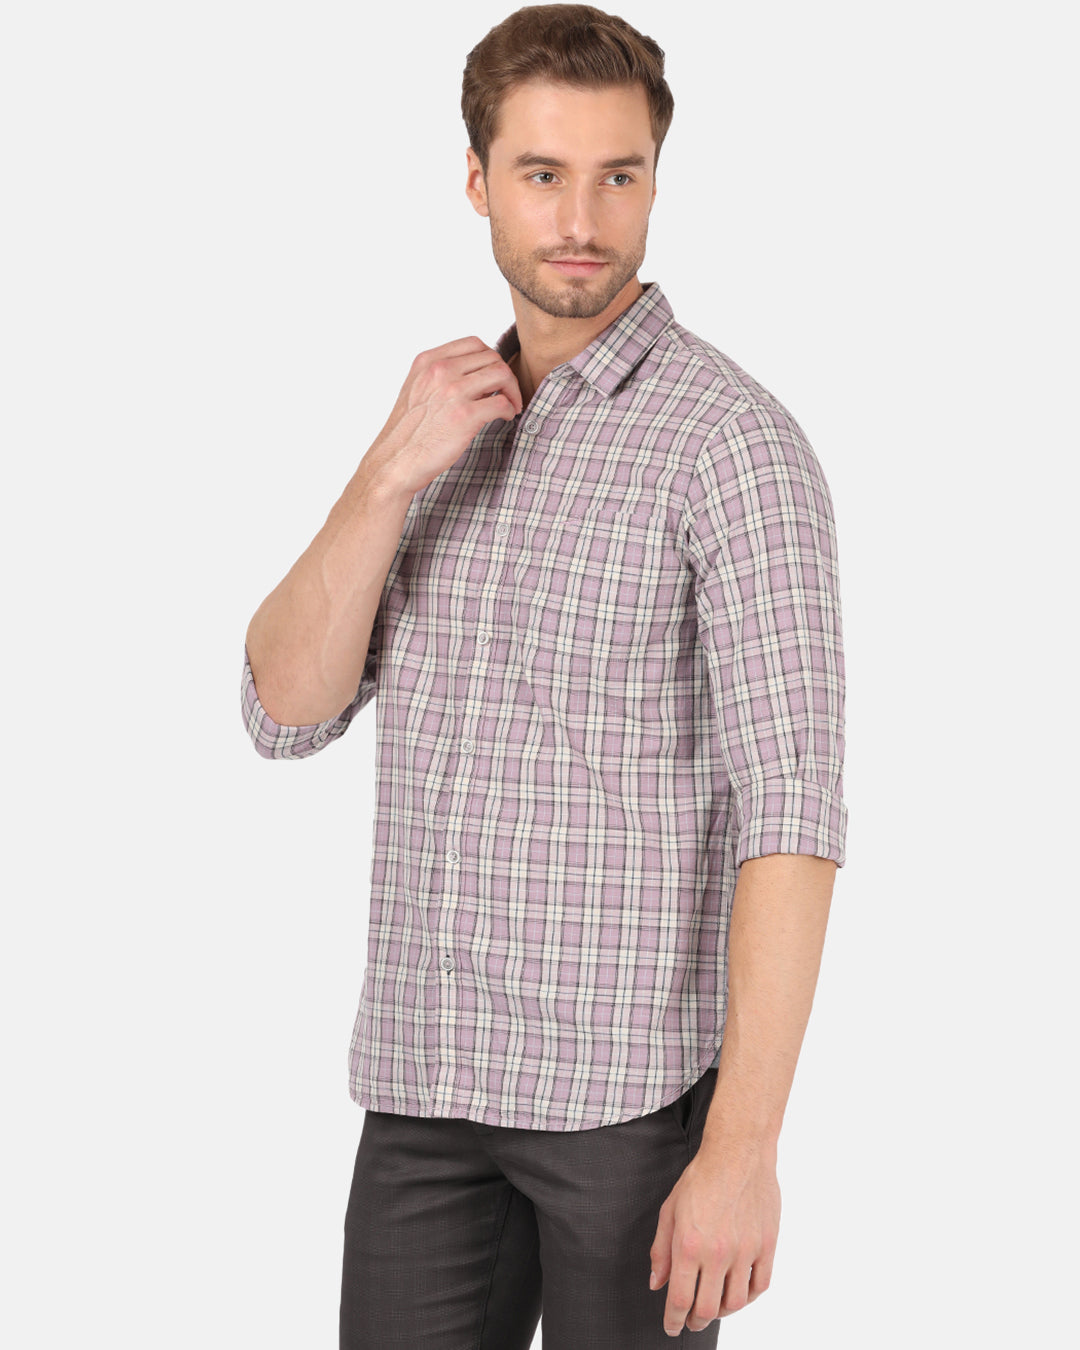 Crocodile Casual Full Sleeve Comfort Fit Checks Purple with Collar Shirt for Men